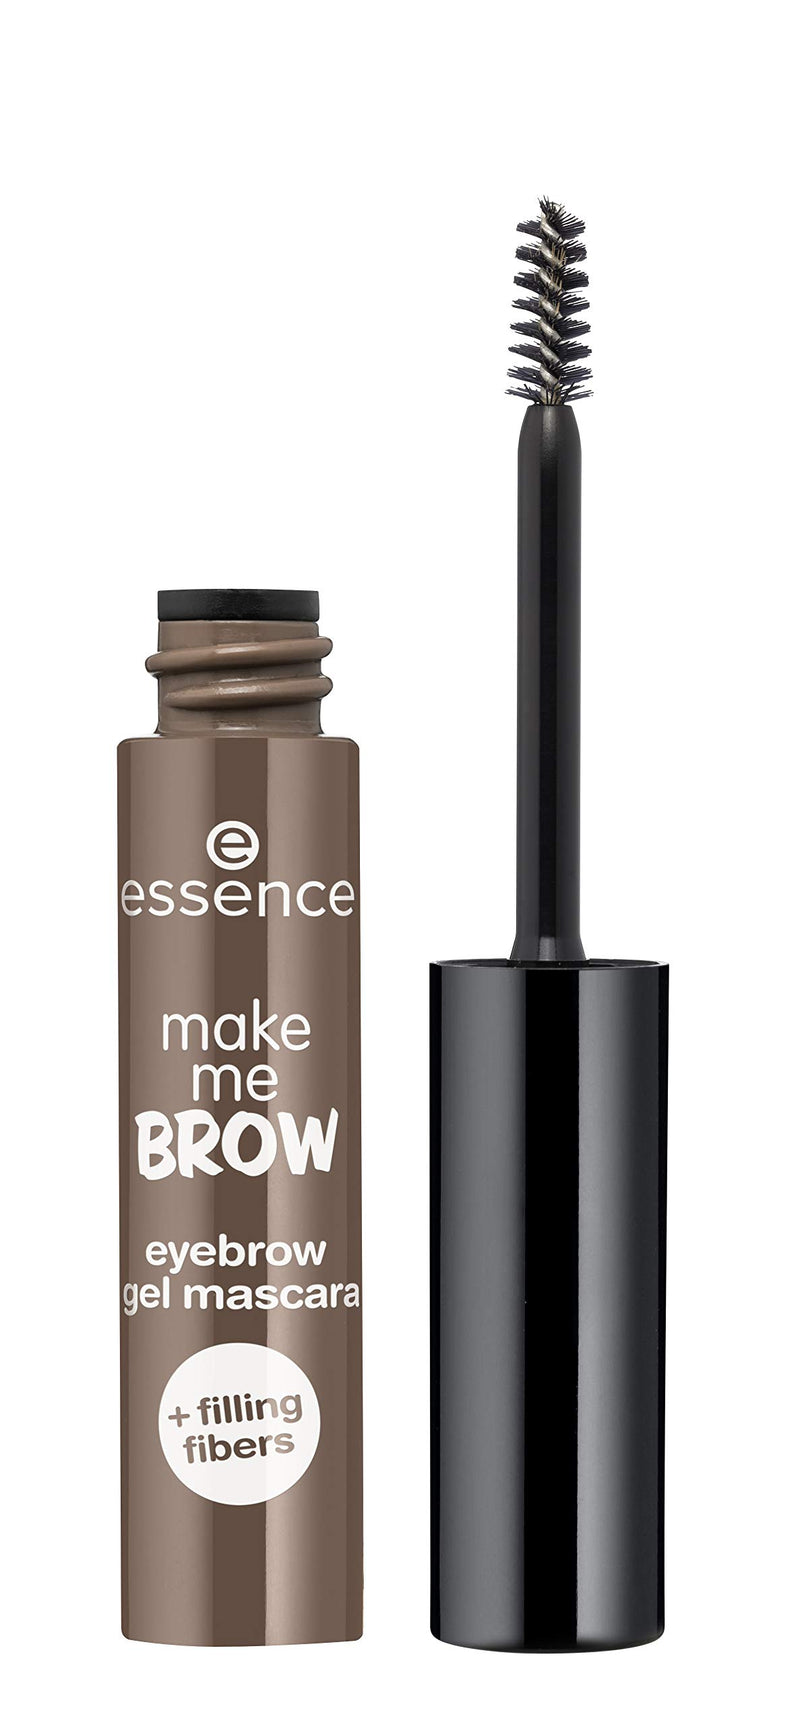 essence | 3-Pack Make Me Brow Eyebrow Gel Mascara | Infused with Fibers to Fill & Sculpt | Vegan & Paraben Free | Cruelty Free (02 | Browny Brows) 02 | Browny Brows - BeesActive Australia